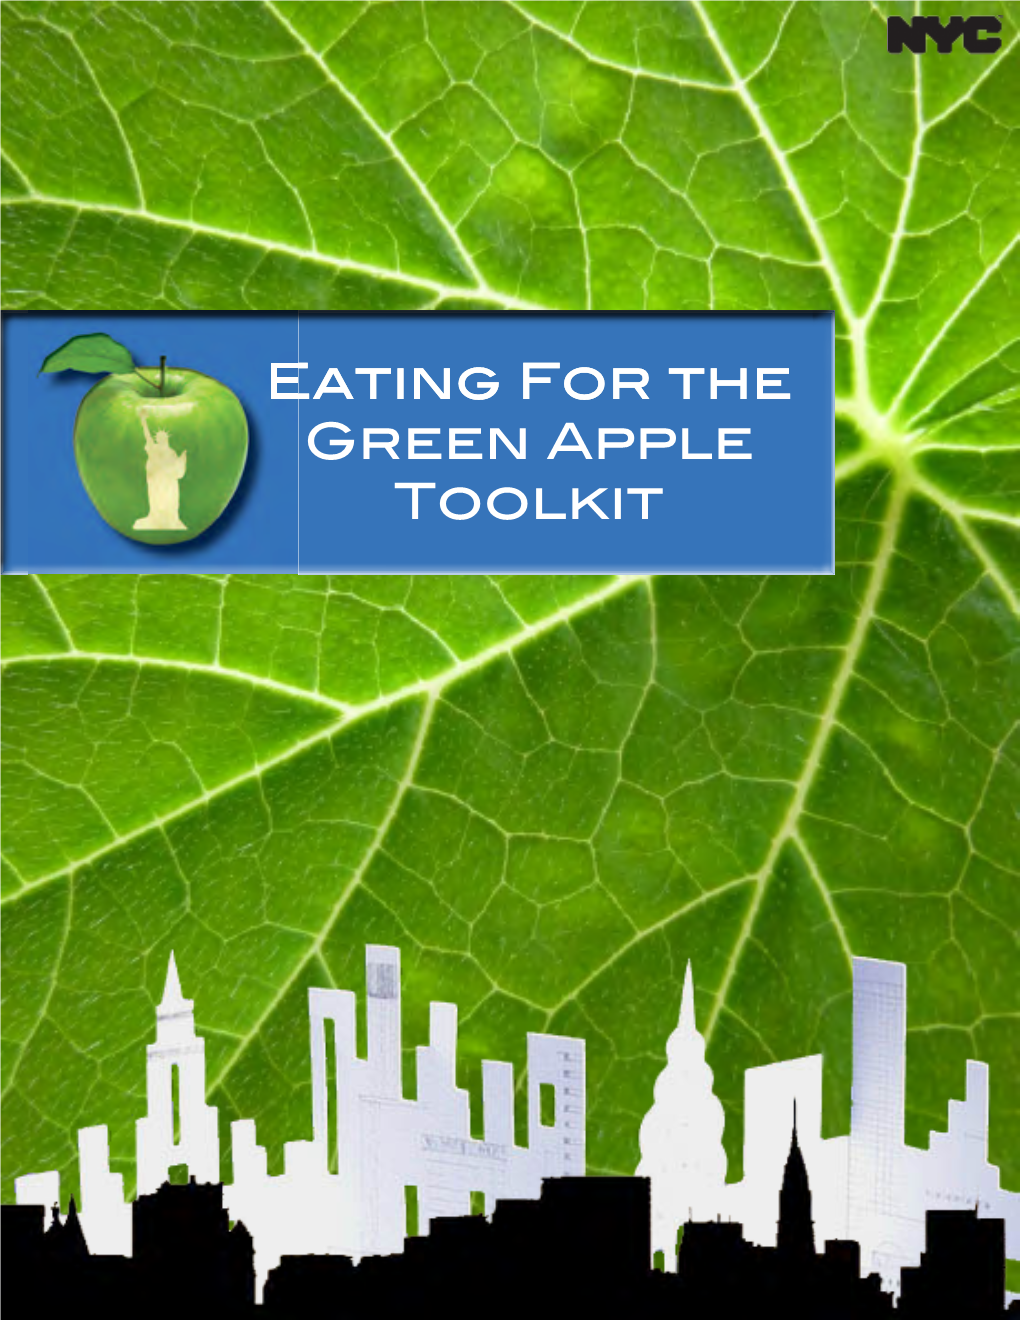 Eating for the Green Apple Toolkit Introduction This Toolkit Is Part of the Eating for the Green Apple (EGA) Initiative, Developed by the New York City Government